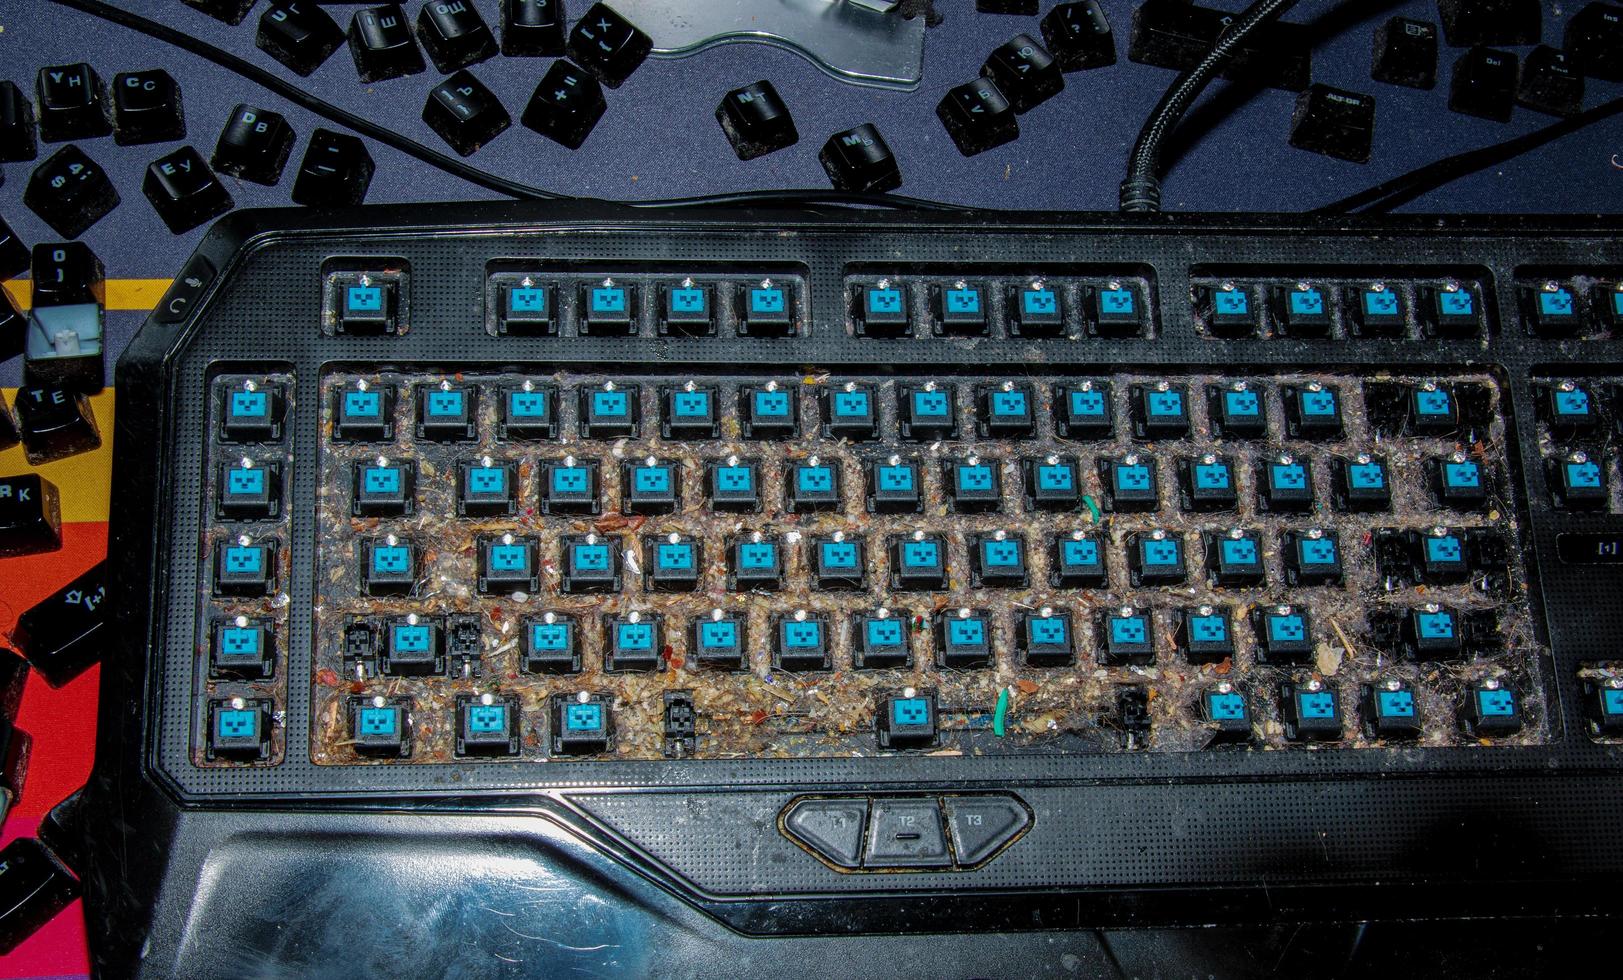 Very dirty keyboard. Dog hair, breadcrumbs and dust accumulated under the keys. Mechanical keyboard switches without buttons photo